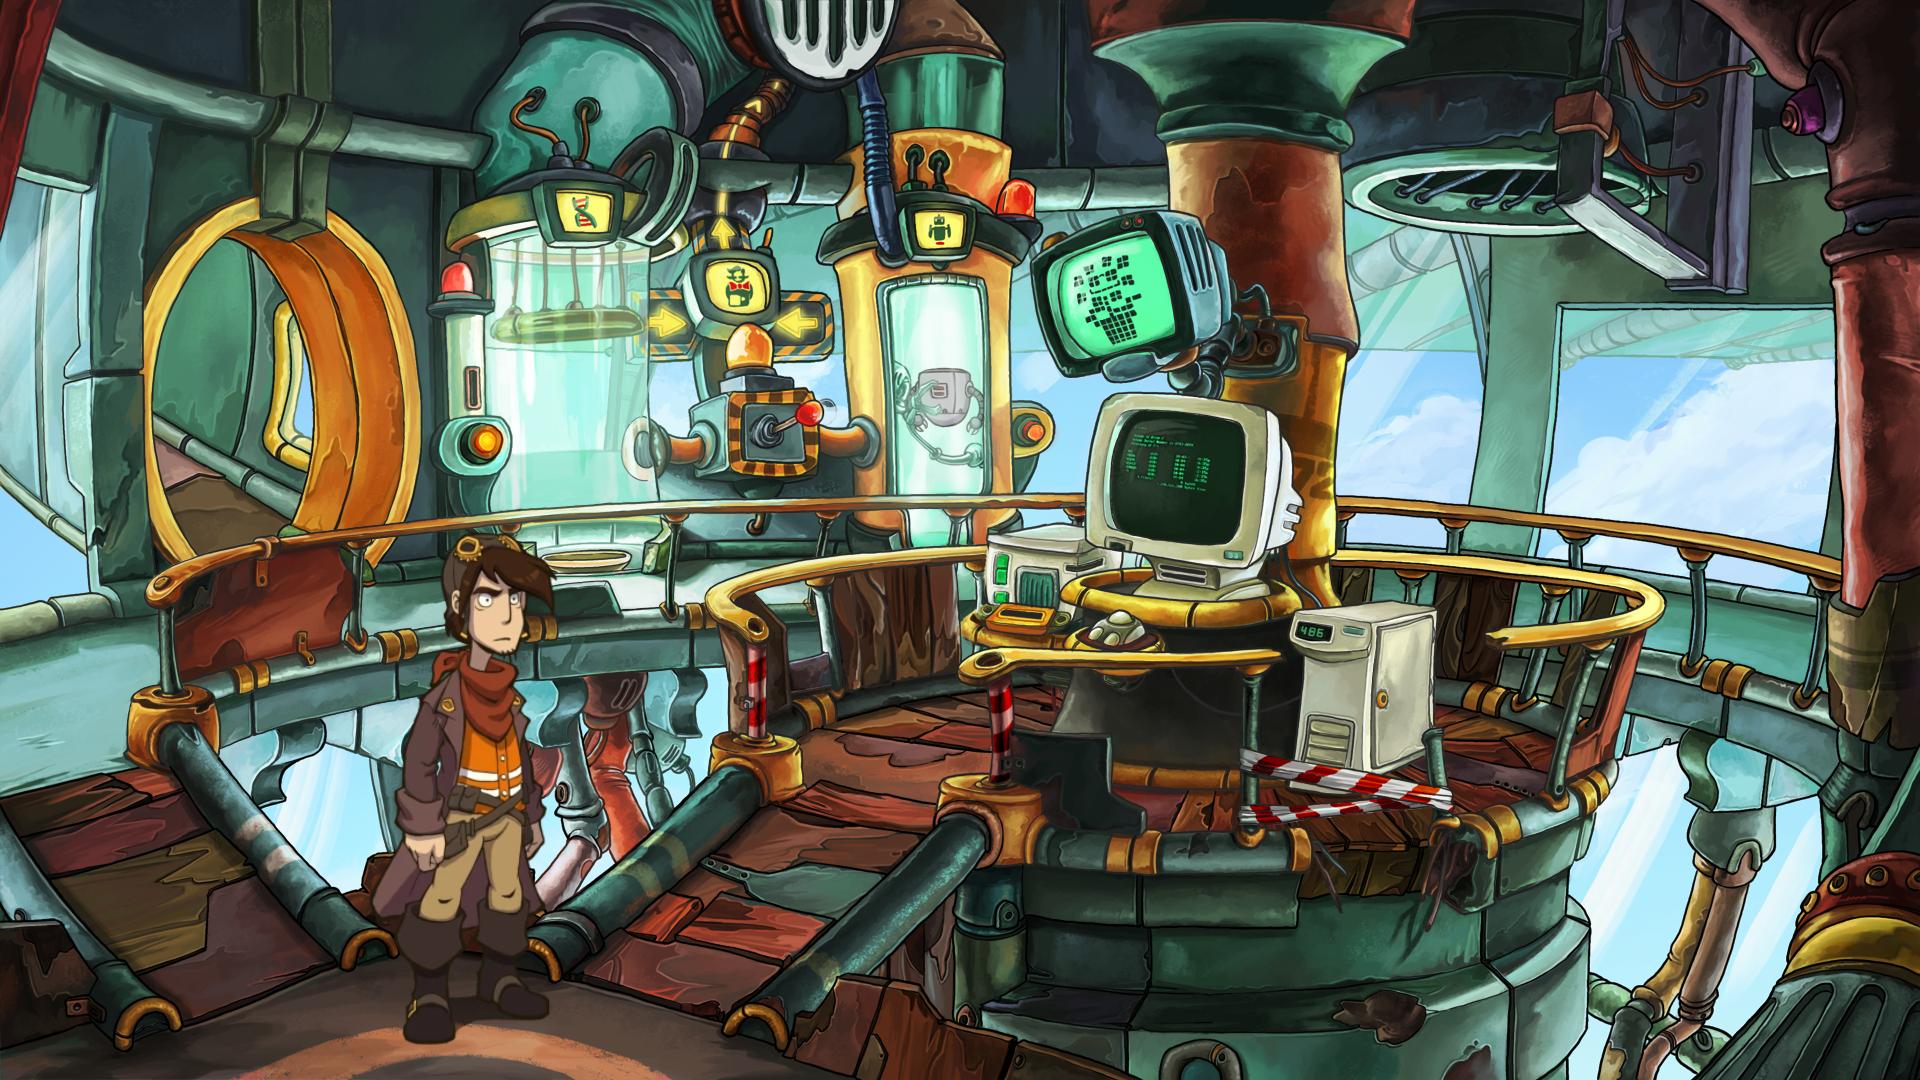 visionaire player stopped working deponia doomsday